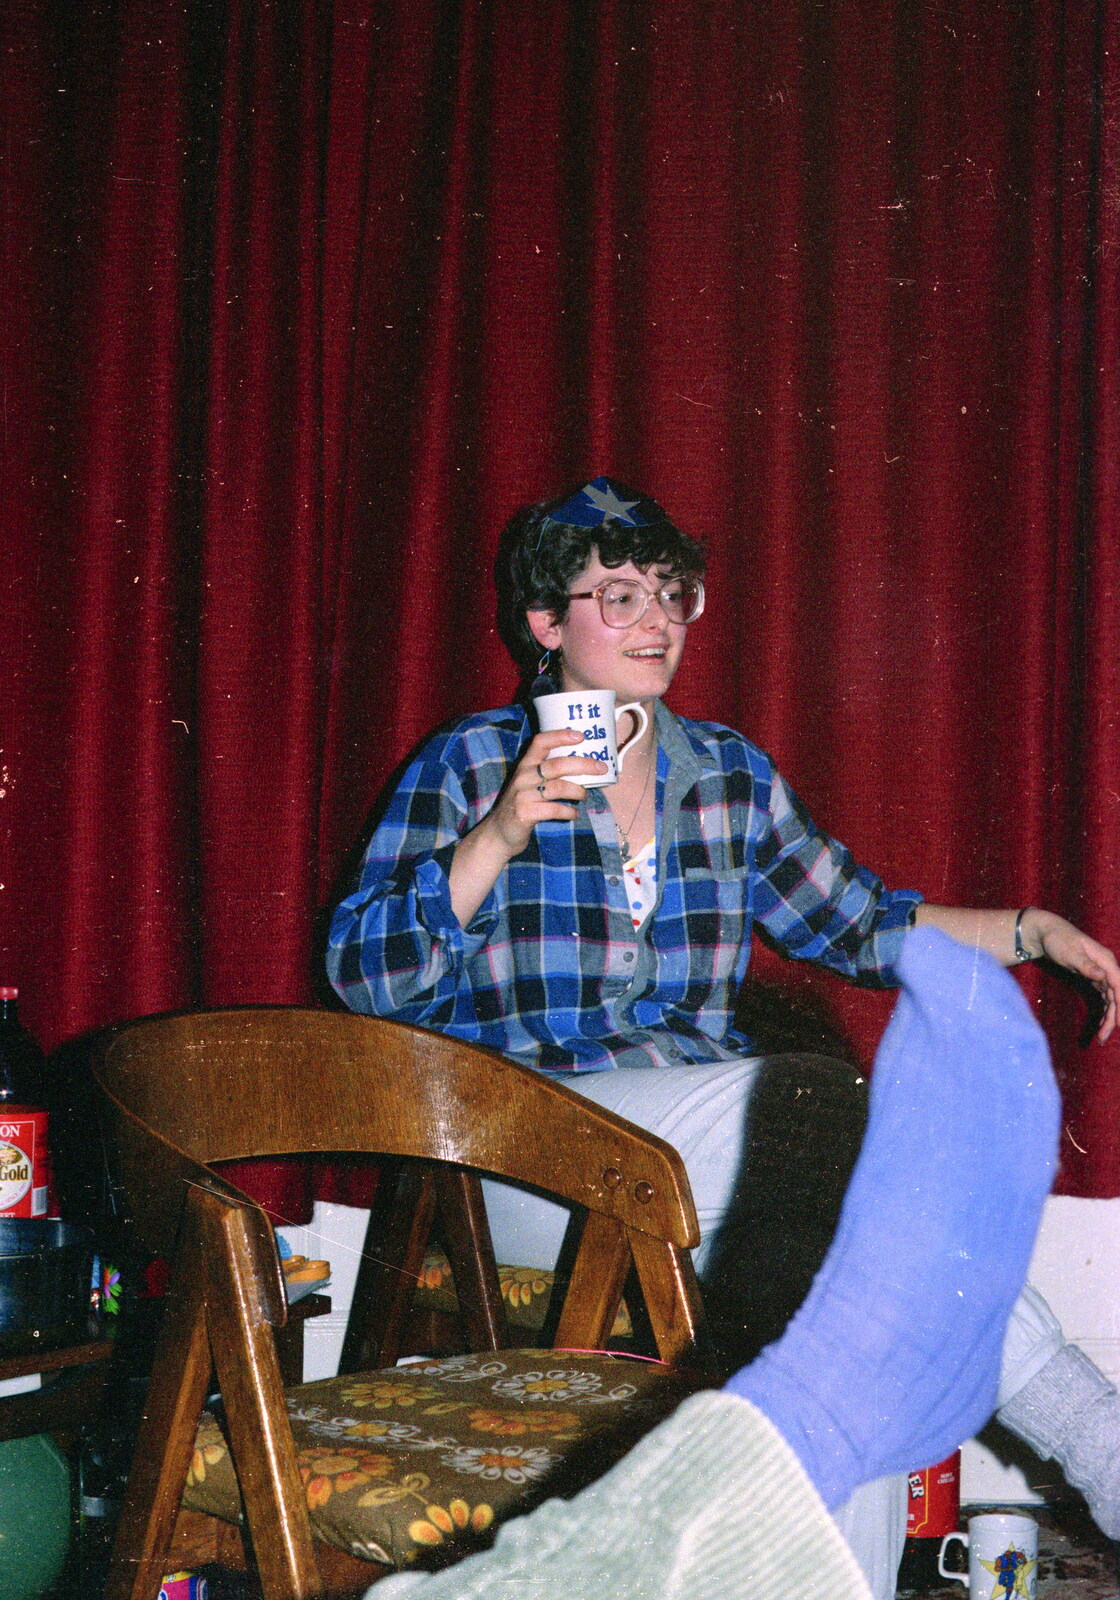 Barbara and a blue-socked foot from Uni: BABS Christmas Ball and a Beaumont Street Party, Plymouth - 16th December 1985